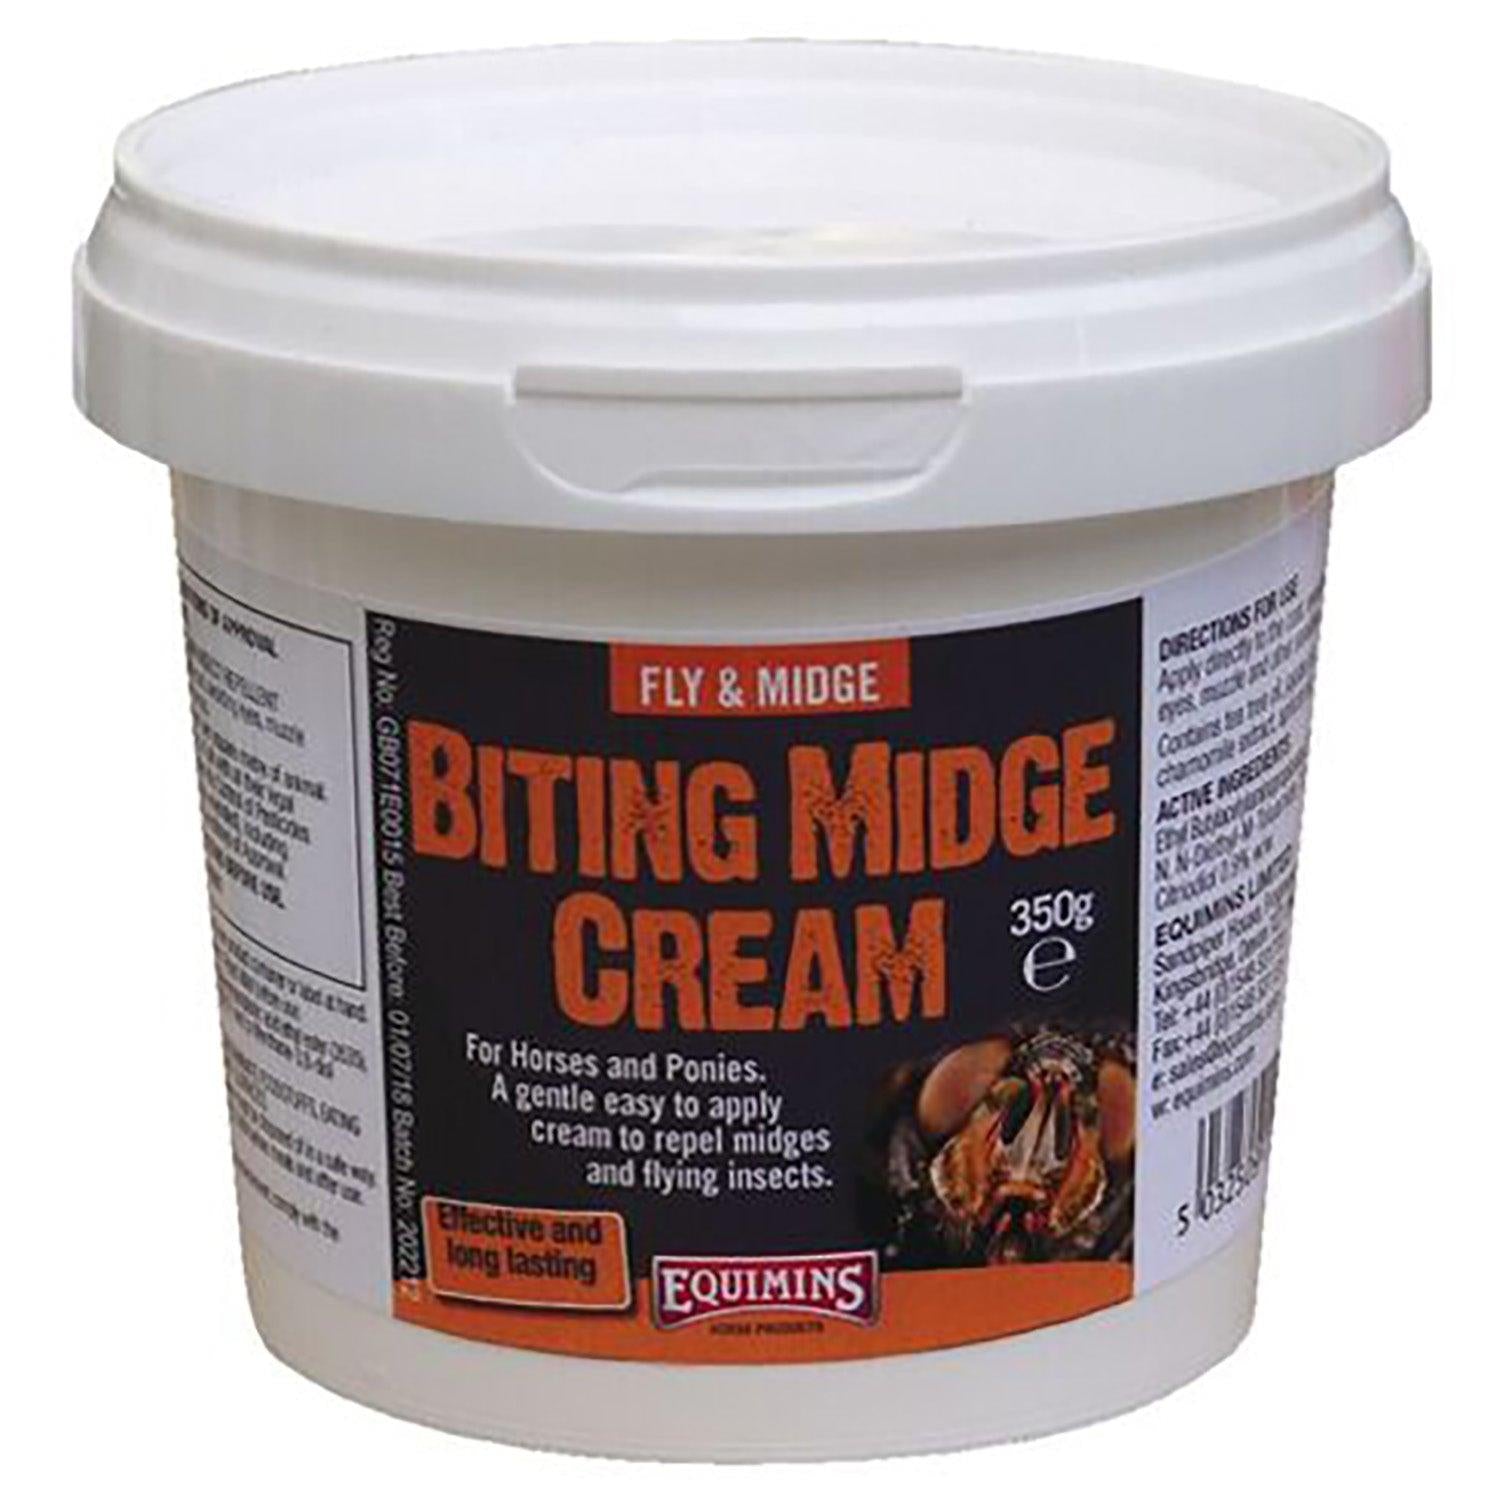 Equimins Biting Midge Cream: A gentle, effective cream to soothe and protect horses from midges